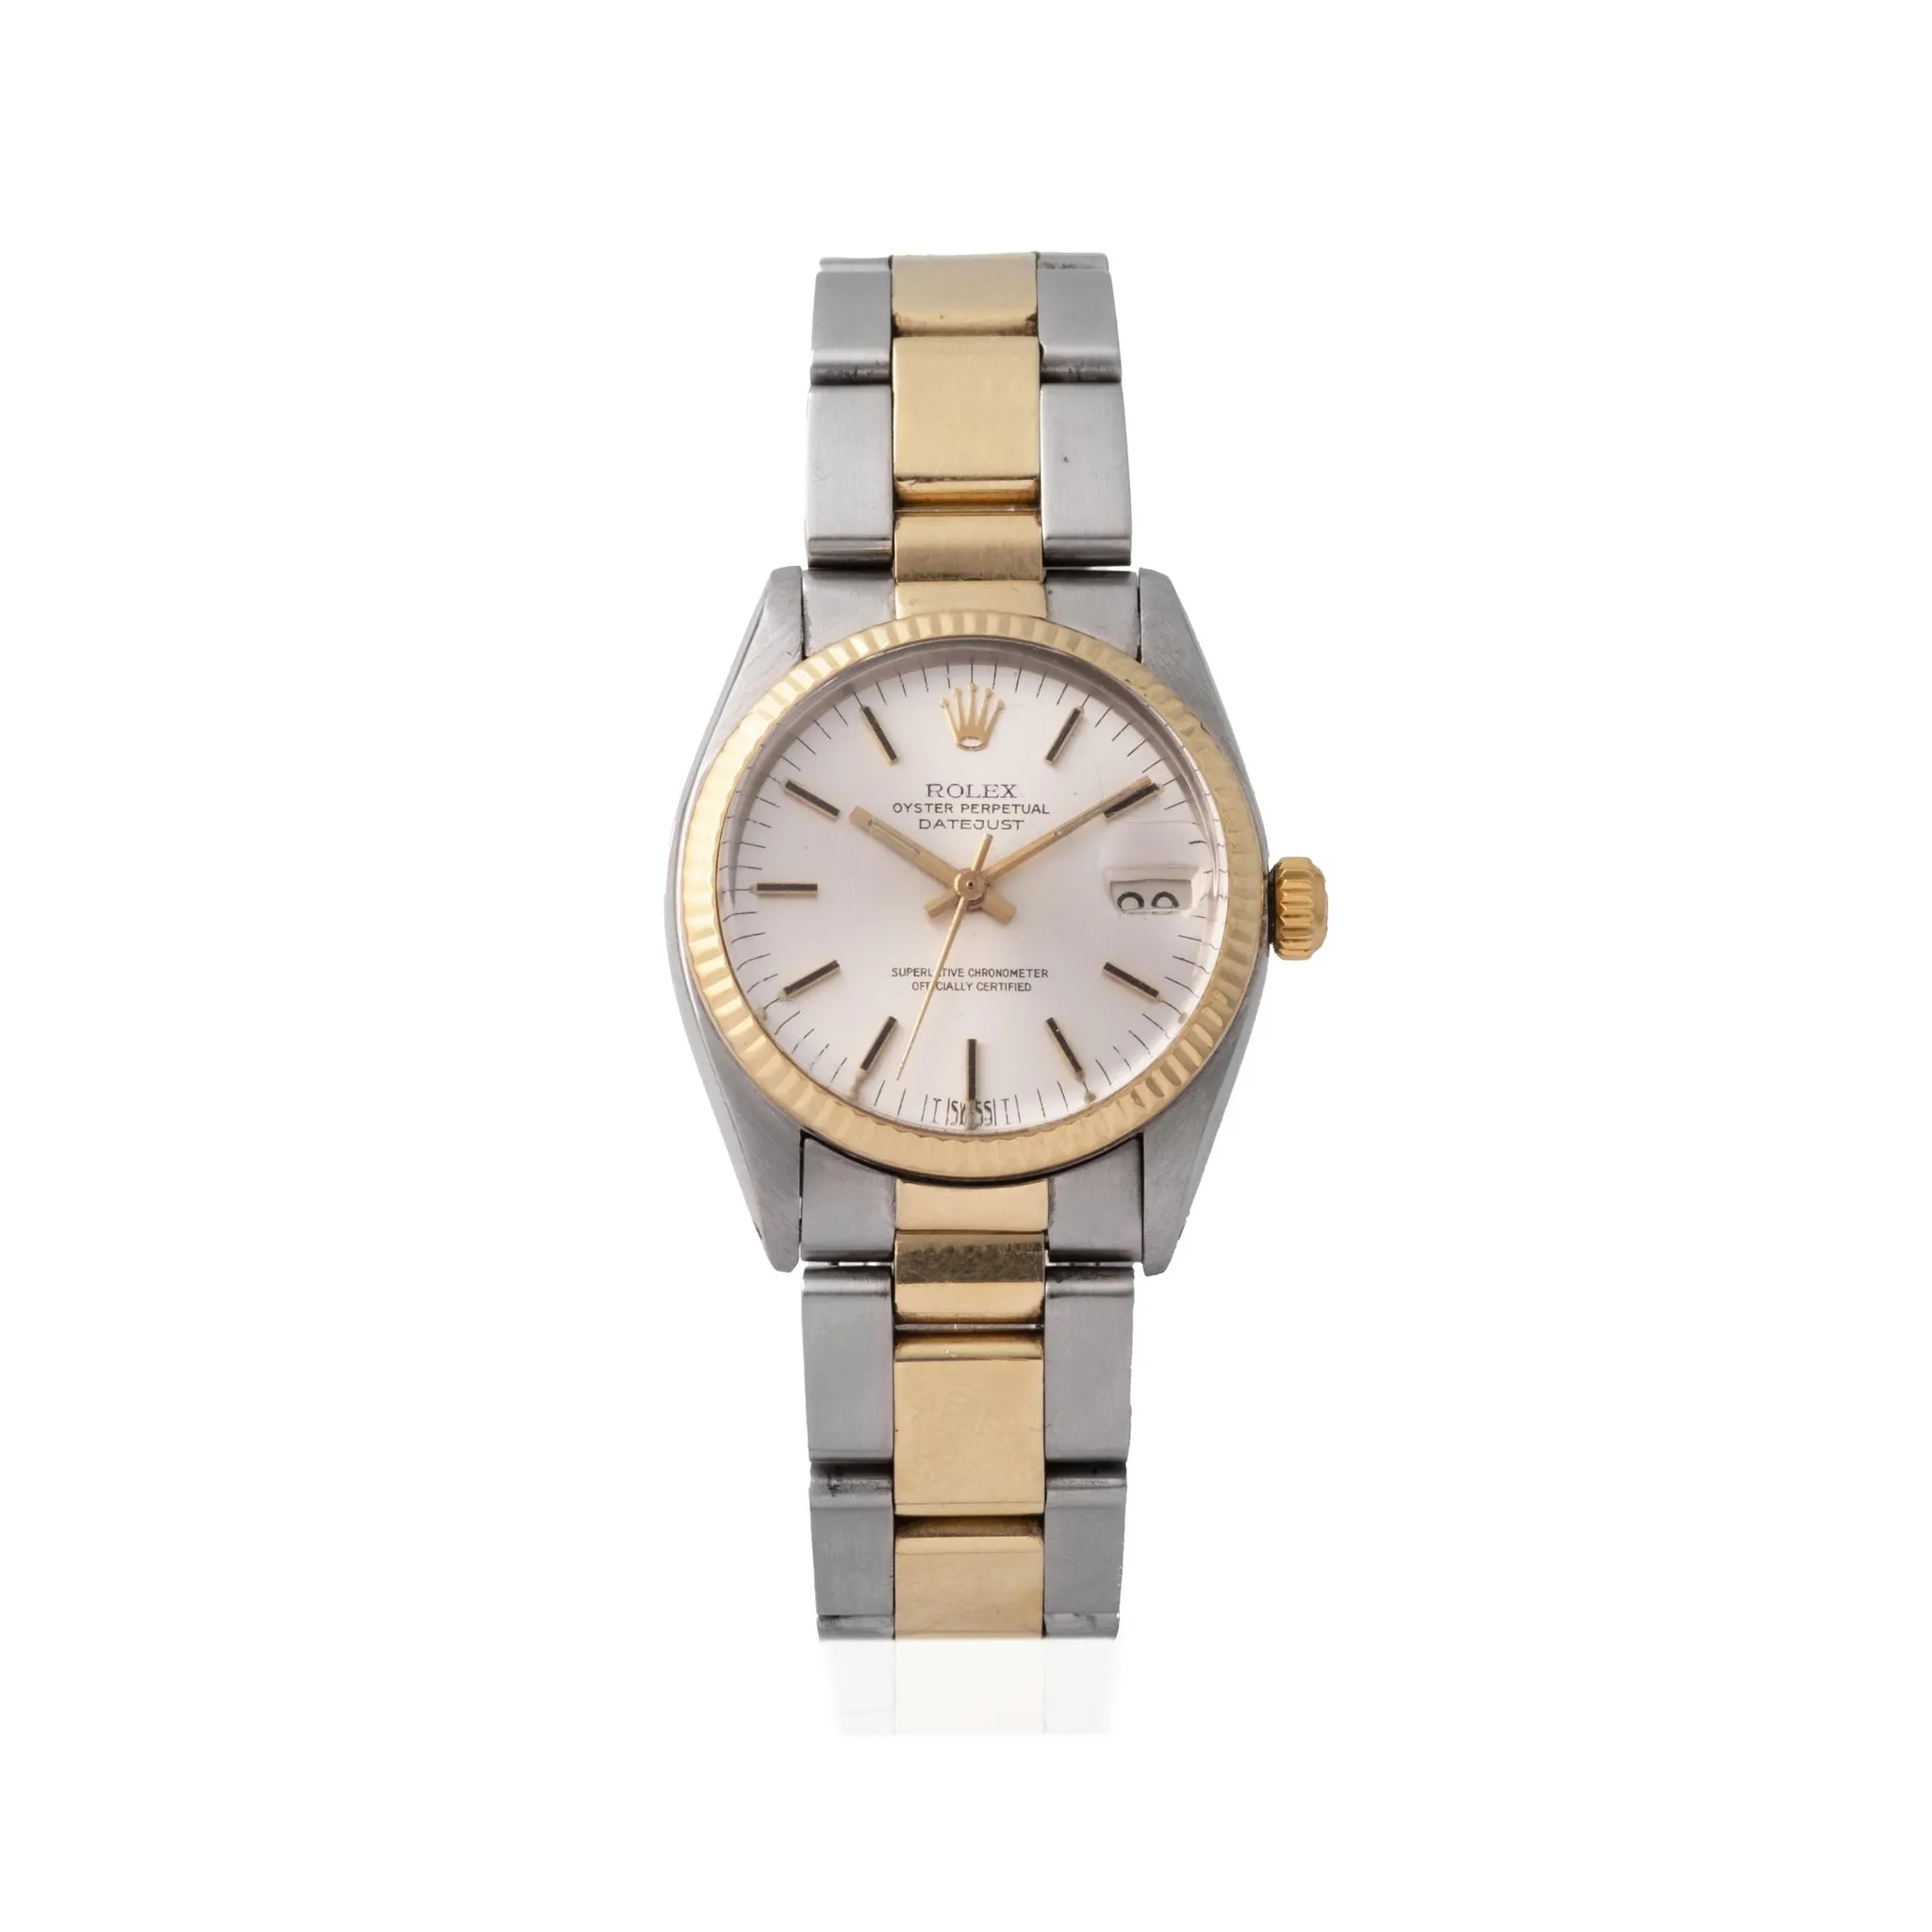 Rolex Datejust 6827 31mm Yellow gold and stainless steel